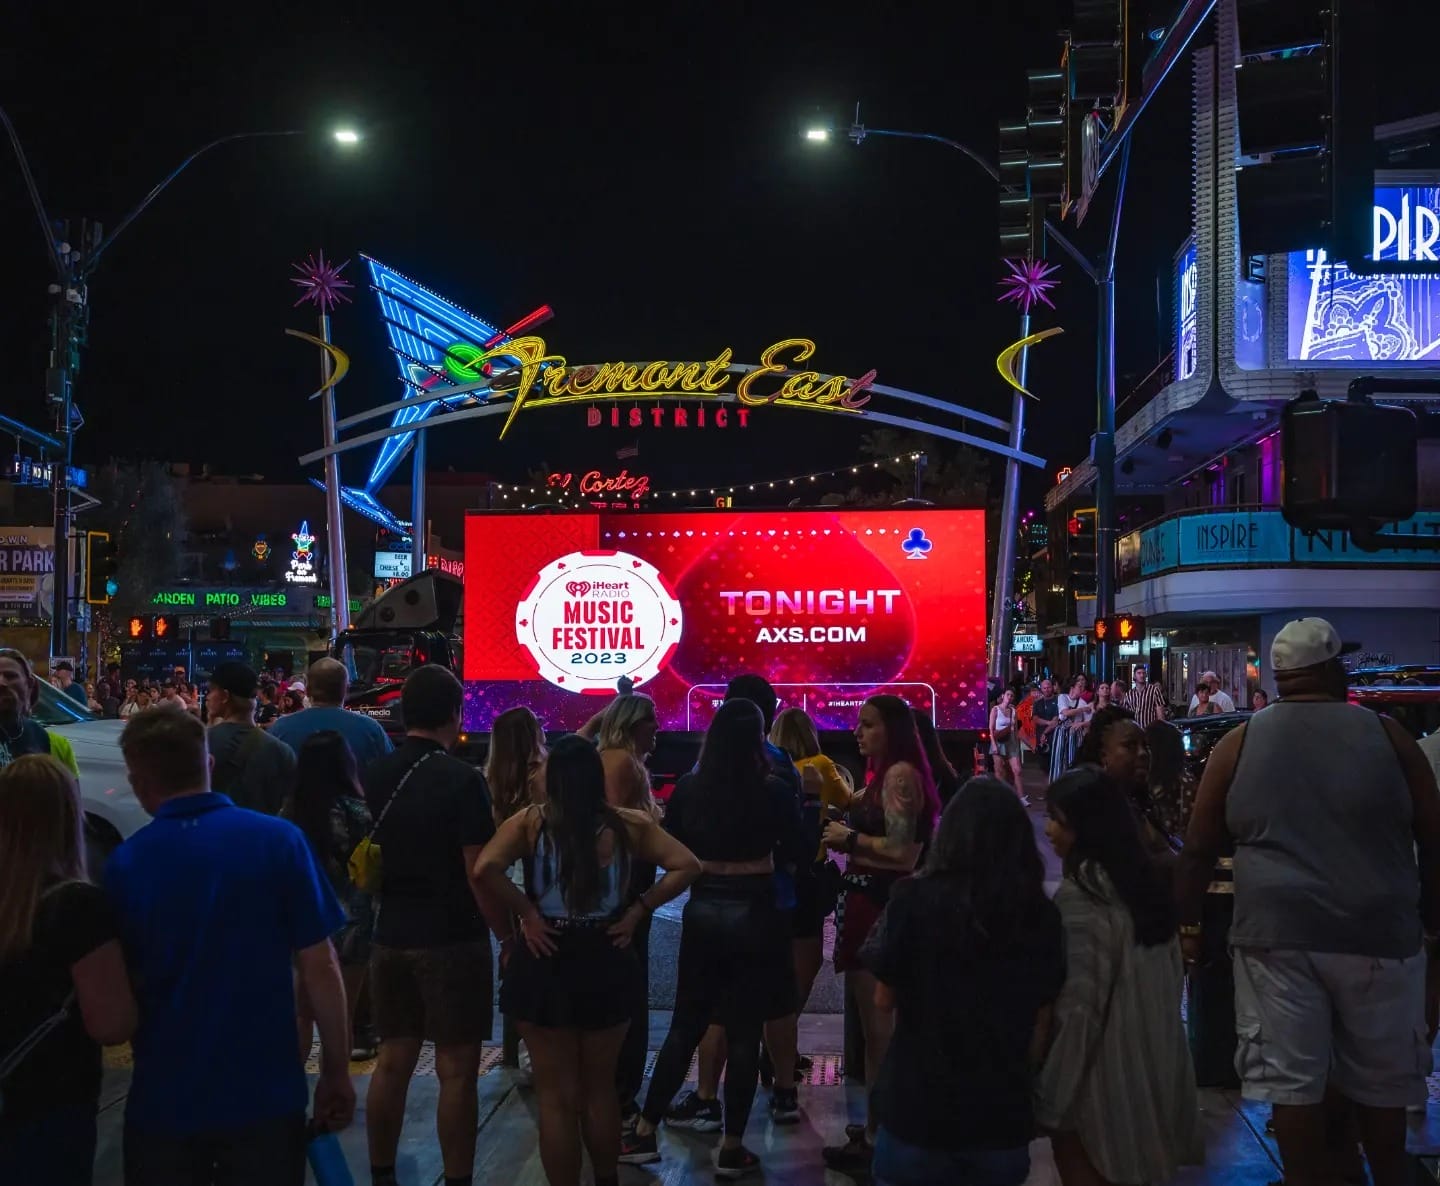 Crowd at nighttime music festival event, Fremont East District.